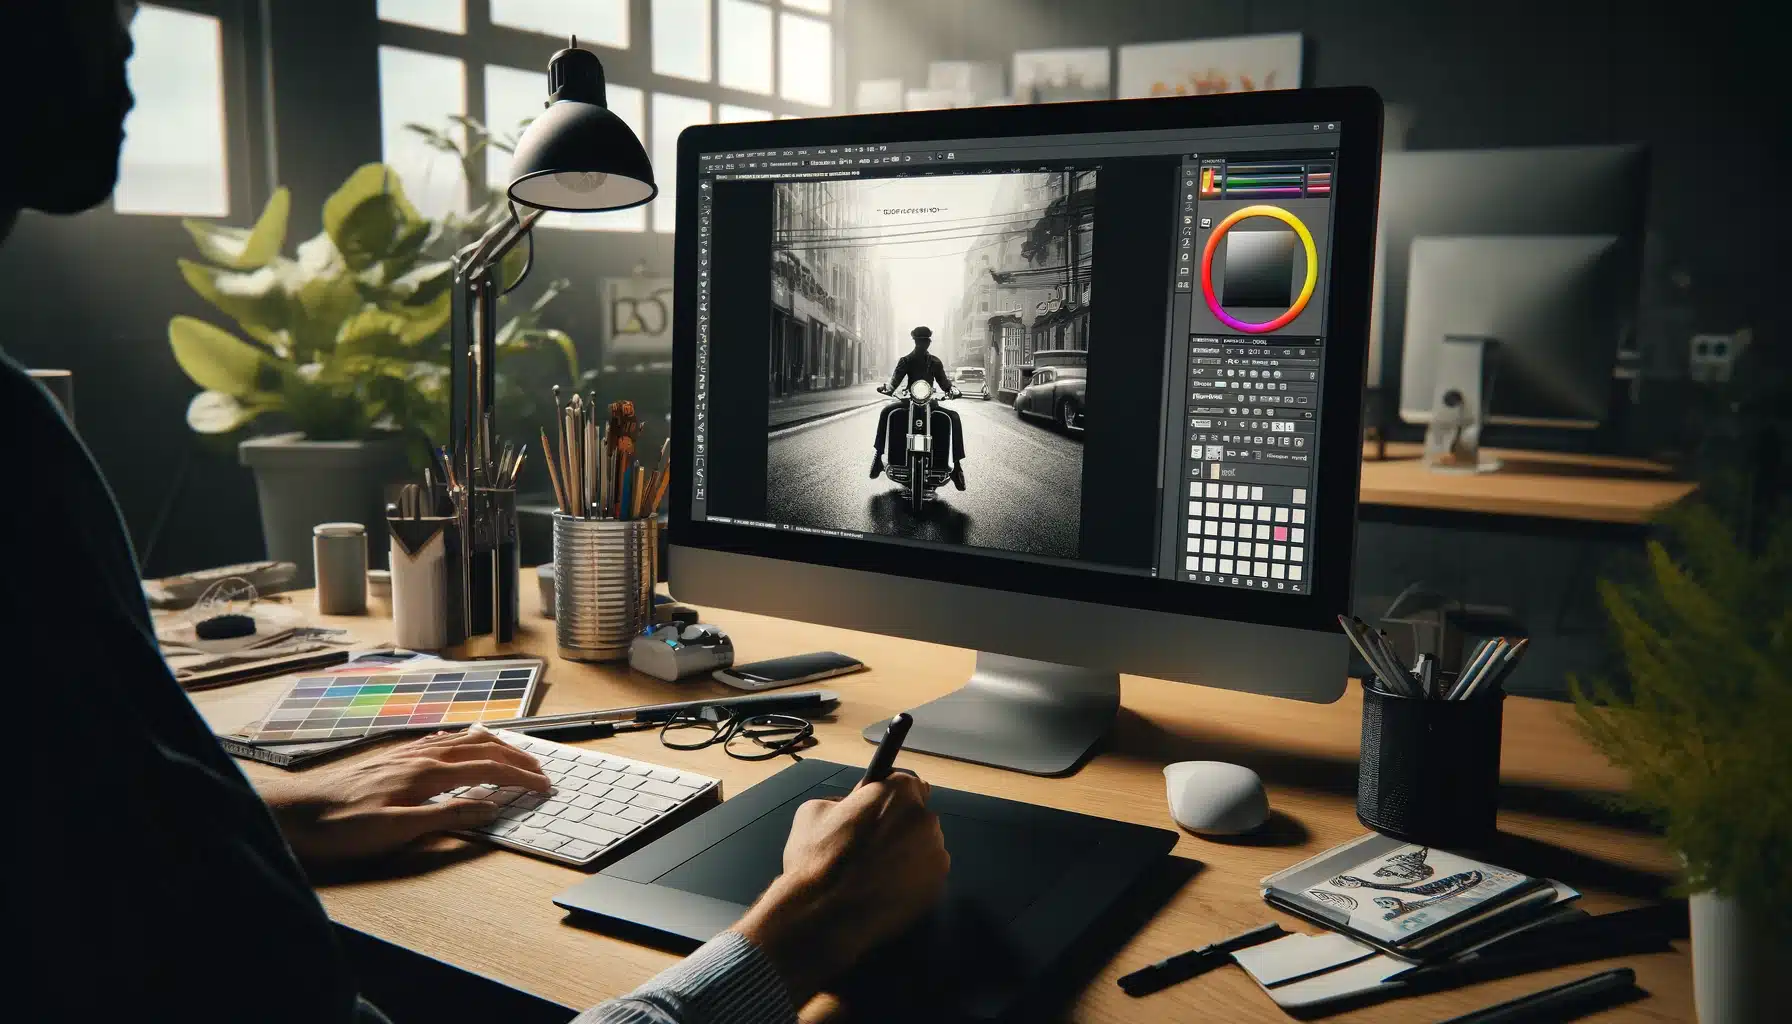 A graphic designer's workspace with a computer screen displaying a Photoshop interface colorizing a black and white photo, highlighting the use of actions and scripts.